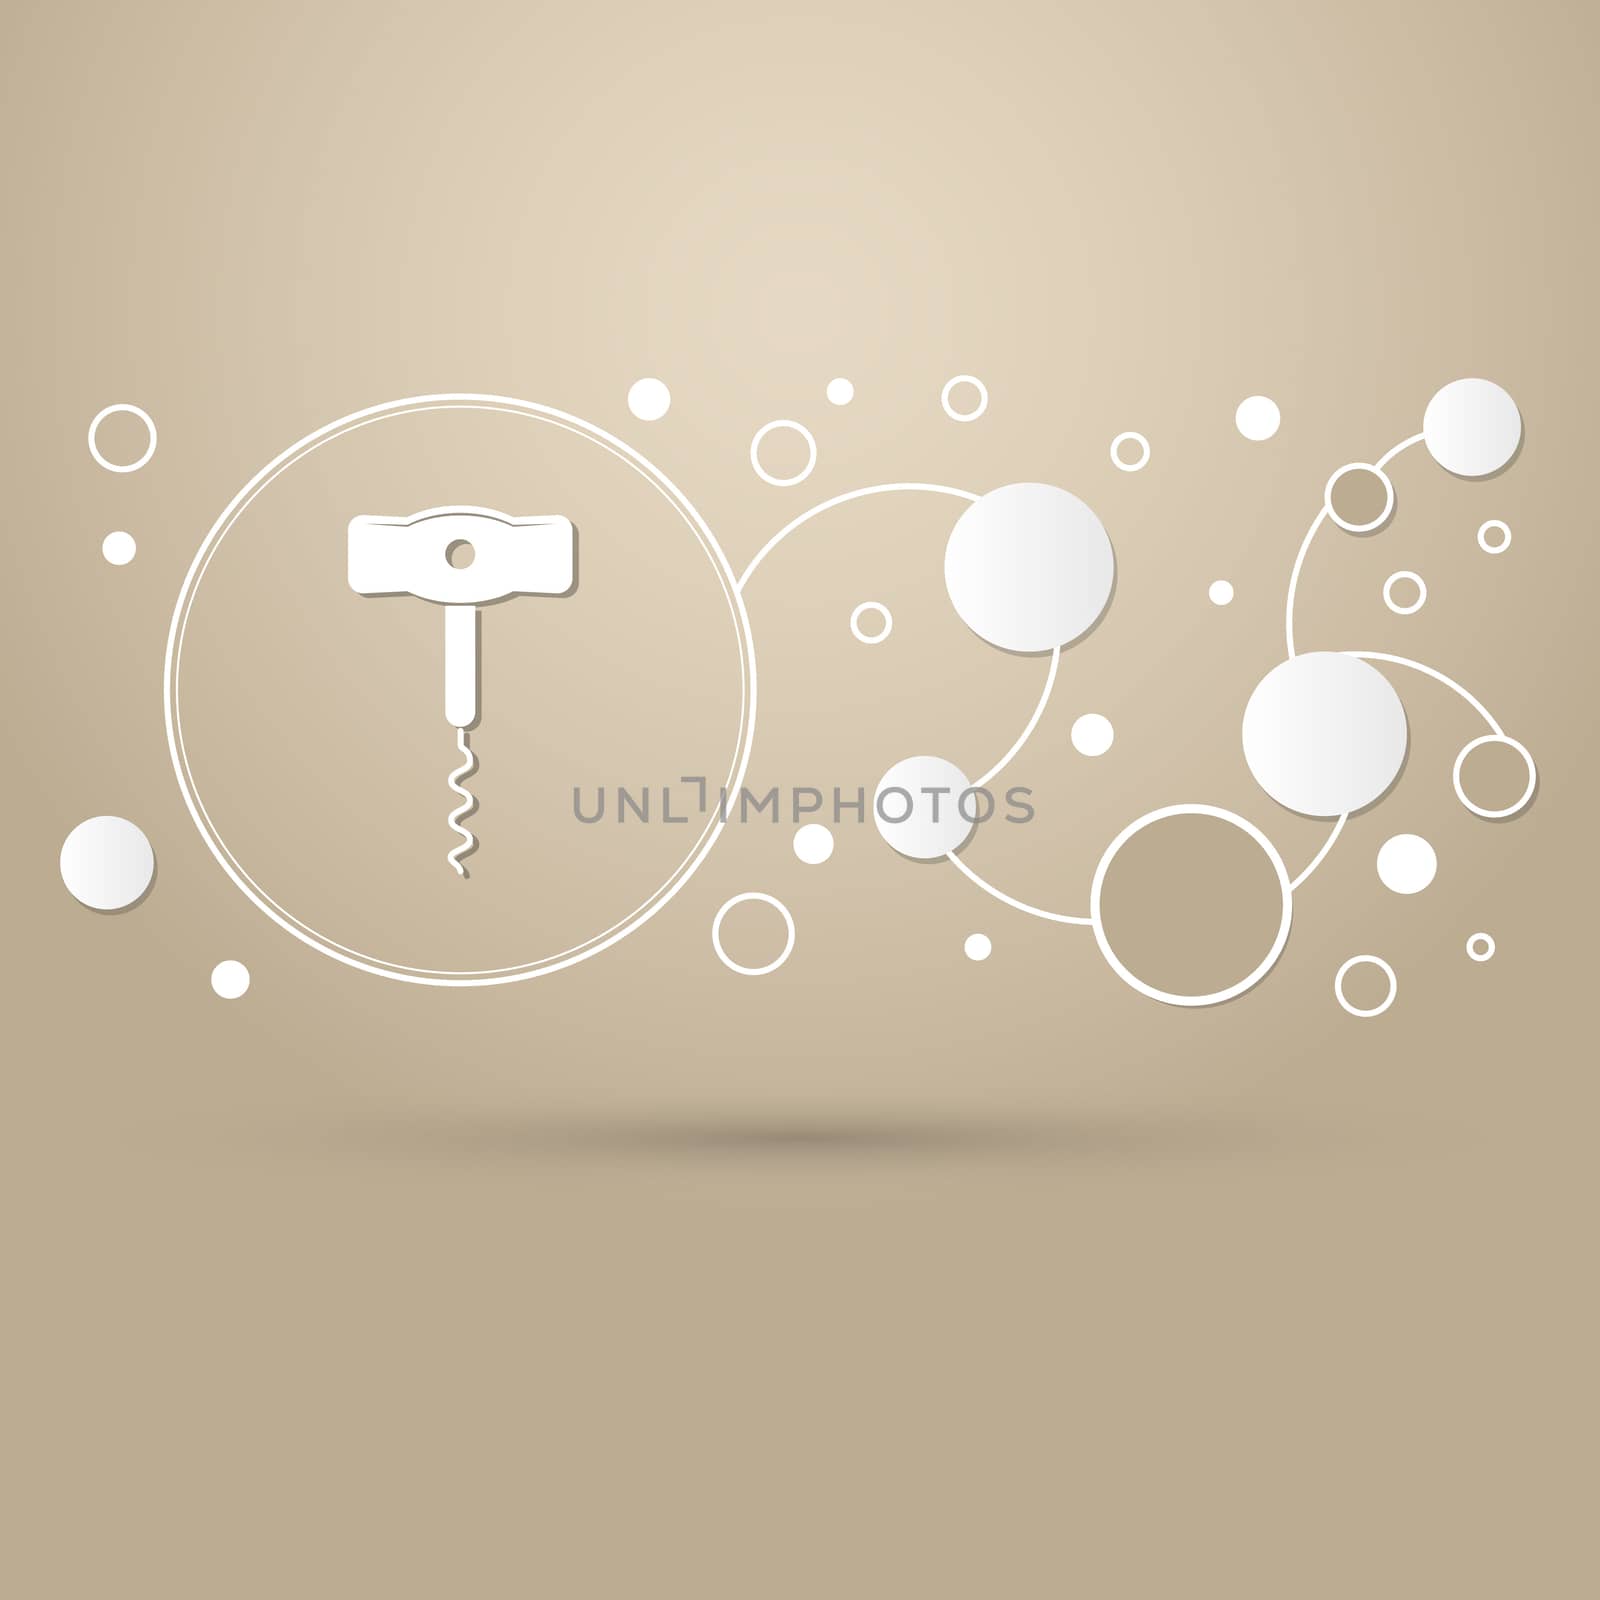 corkscrew icon on a brown background with elegant style and modern design infographic.  by Adamchuk